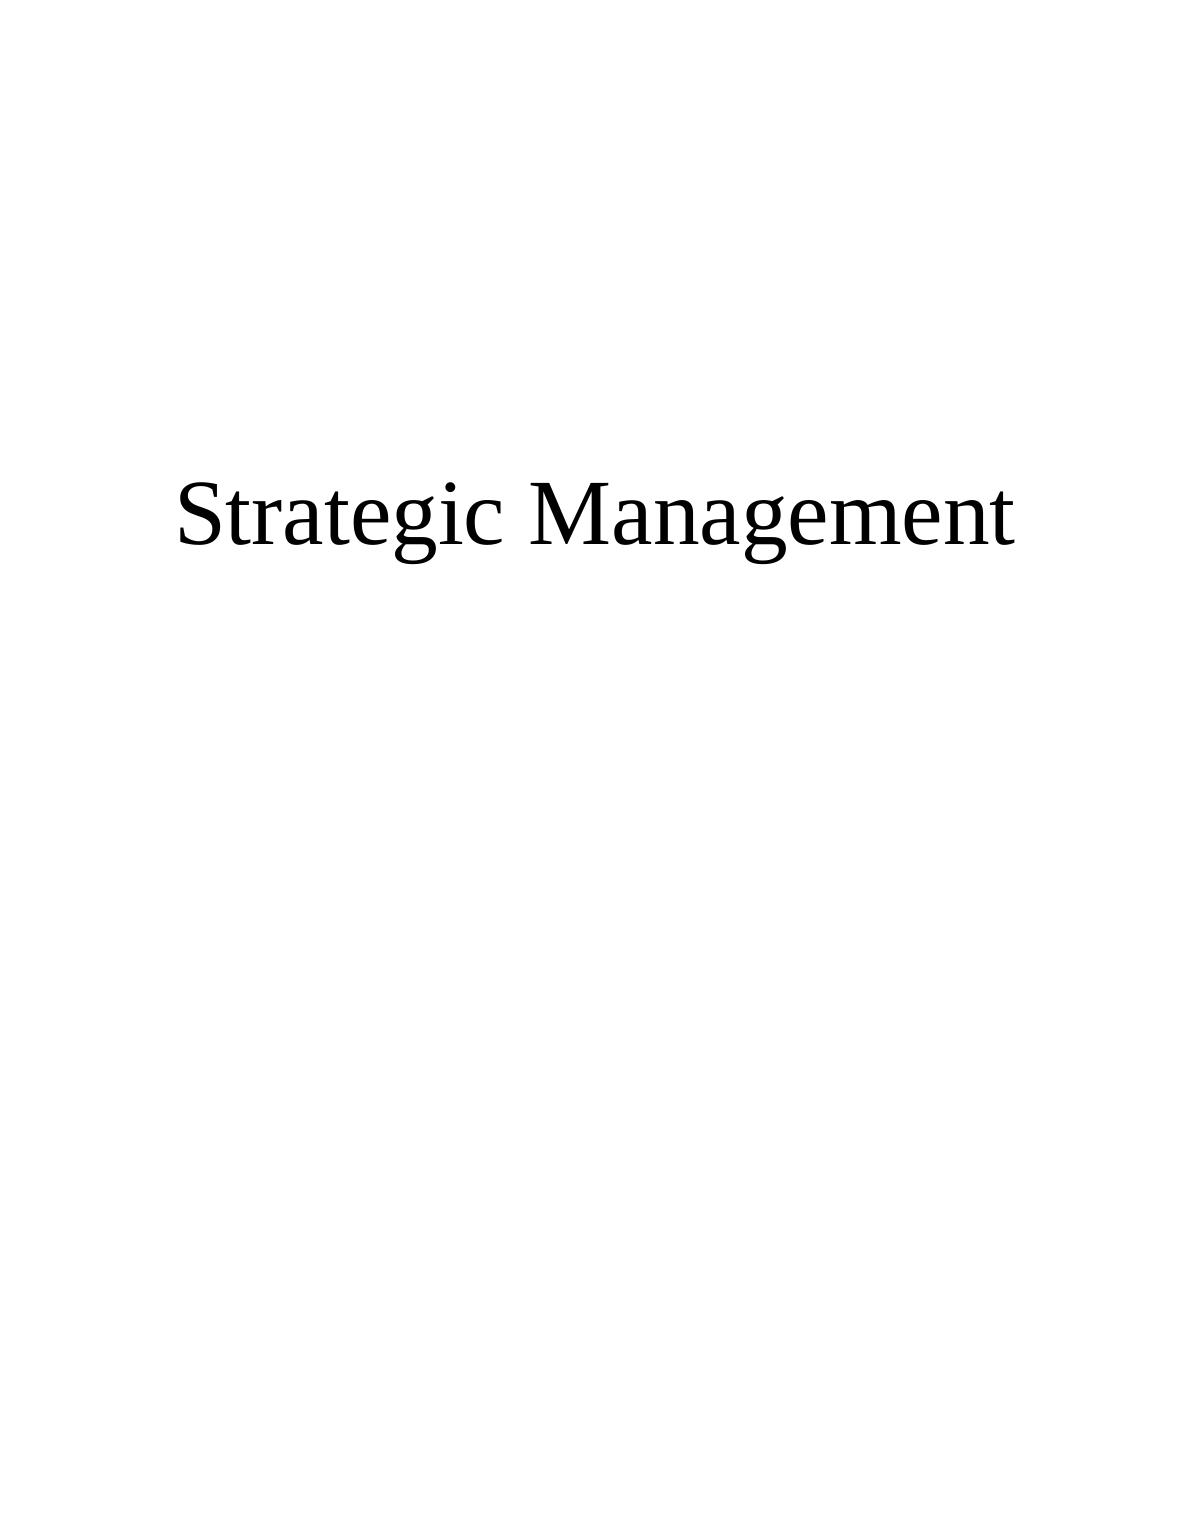 Report on Strategic Management in Business_1